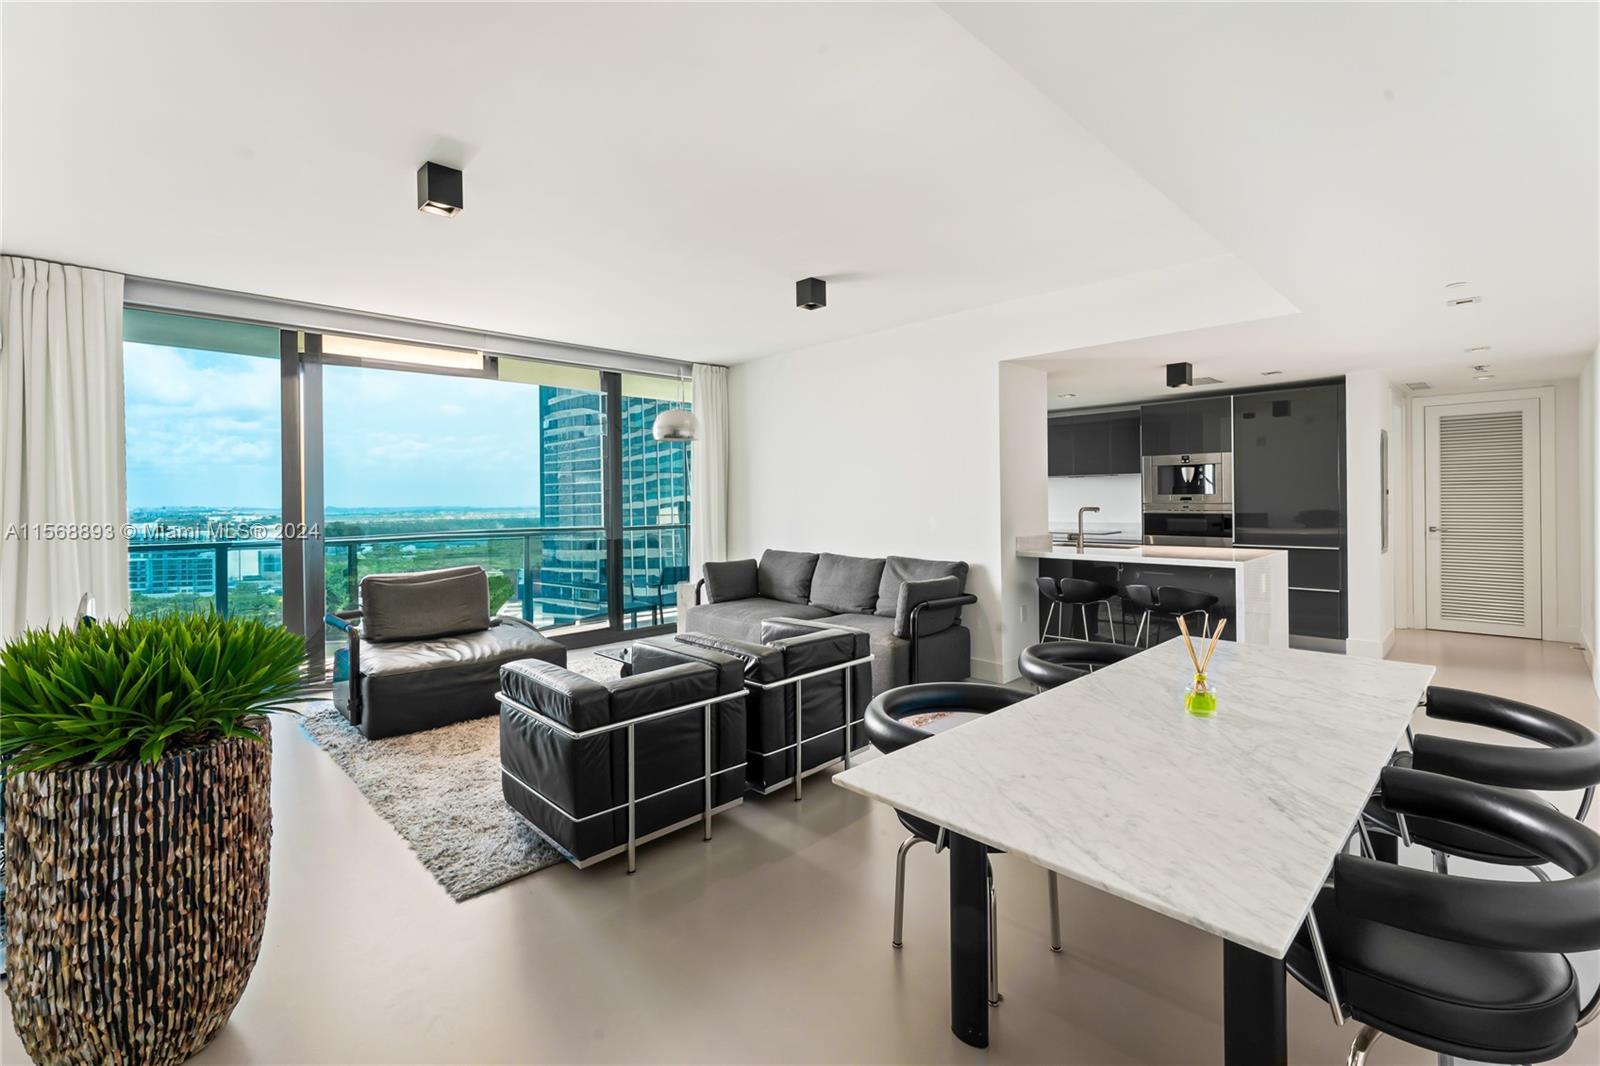 Echo Brickell #1905, nestled in the heart of Miami’s most prestigious neighborhood, is a beacon of l